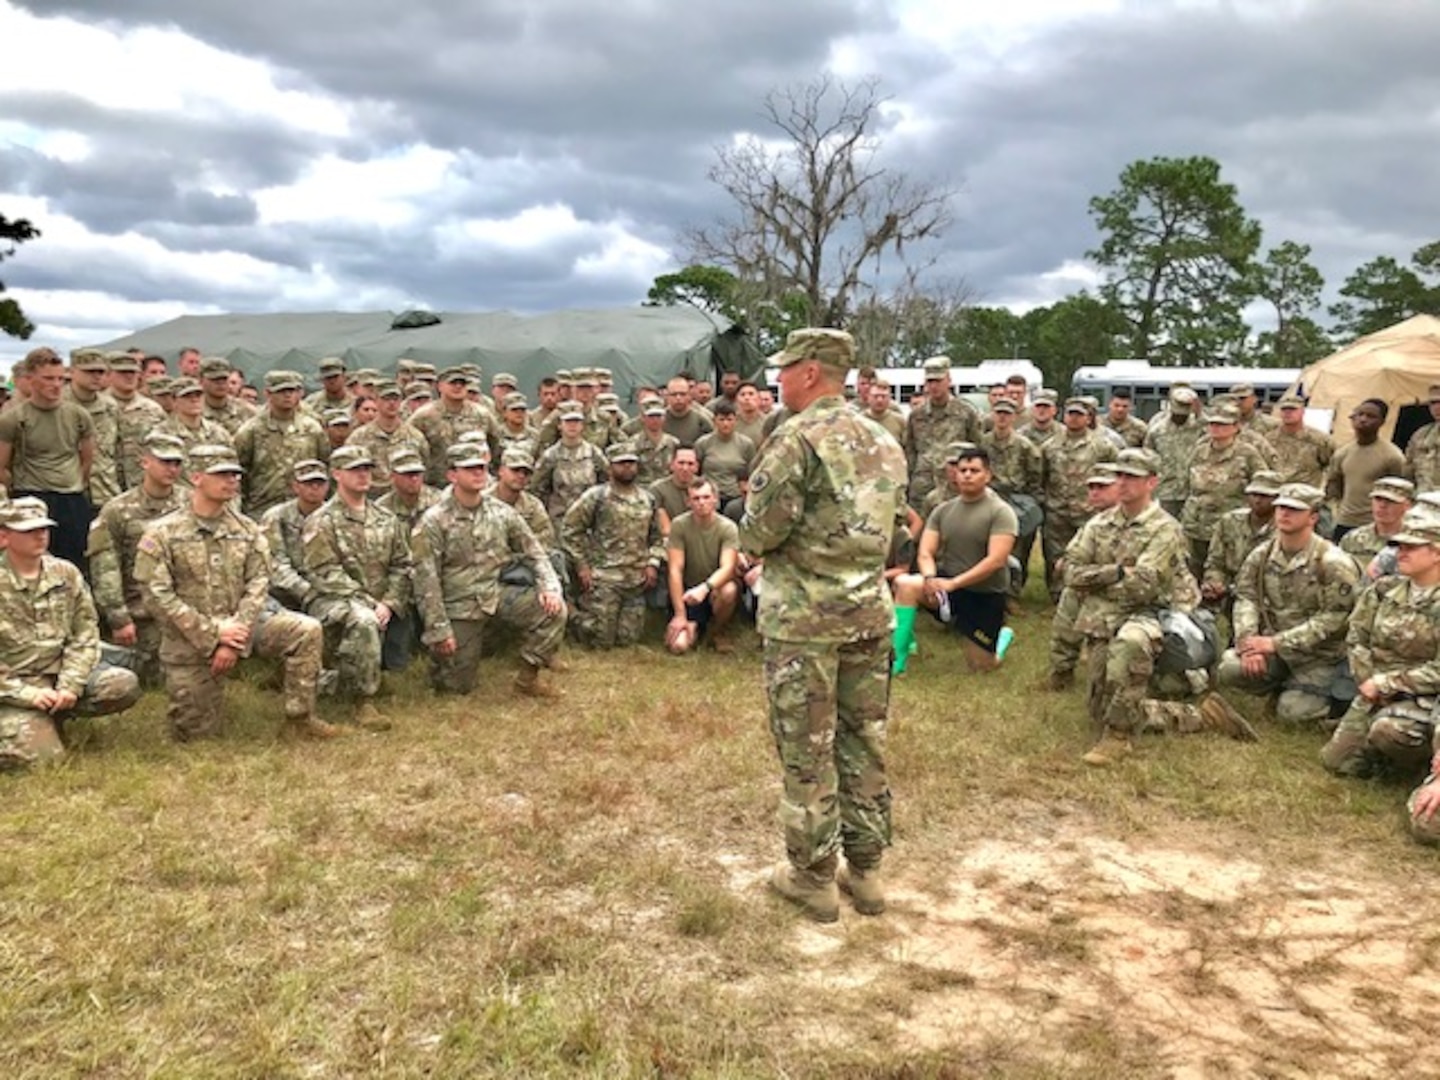 Army Maj. Gen. William “Bill” Hall, commander, Joint Task Force Civil Support, talks with Soldiers and Airmen of the 503rd Military Police Battalion during their recent field training exercise (FTX) at Camp Blanding, Fla., on Oct. 24, 2018. The 503rd is a subordinate battalion that falls under Task Force Operations, one of the major task forces that make up the Defense Chemical, Biological, Radiological and Nuclear Response Force (DCRF). It is part of a 5,200-personnel team that extends across 30 bases throughout the United States ready for any a crises response. The FTX provided various skilled training in search & rescue and emergency medical treatment. (Courtesy photo by Navy Chief Petty Officer Zach McKinley)